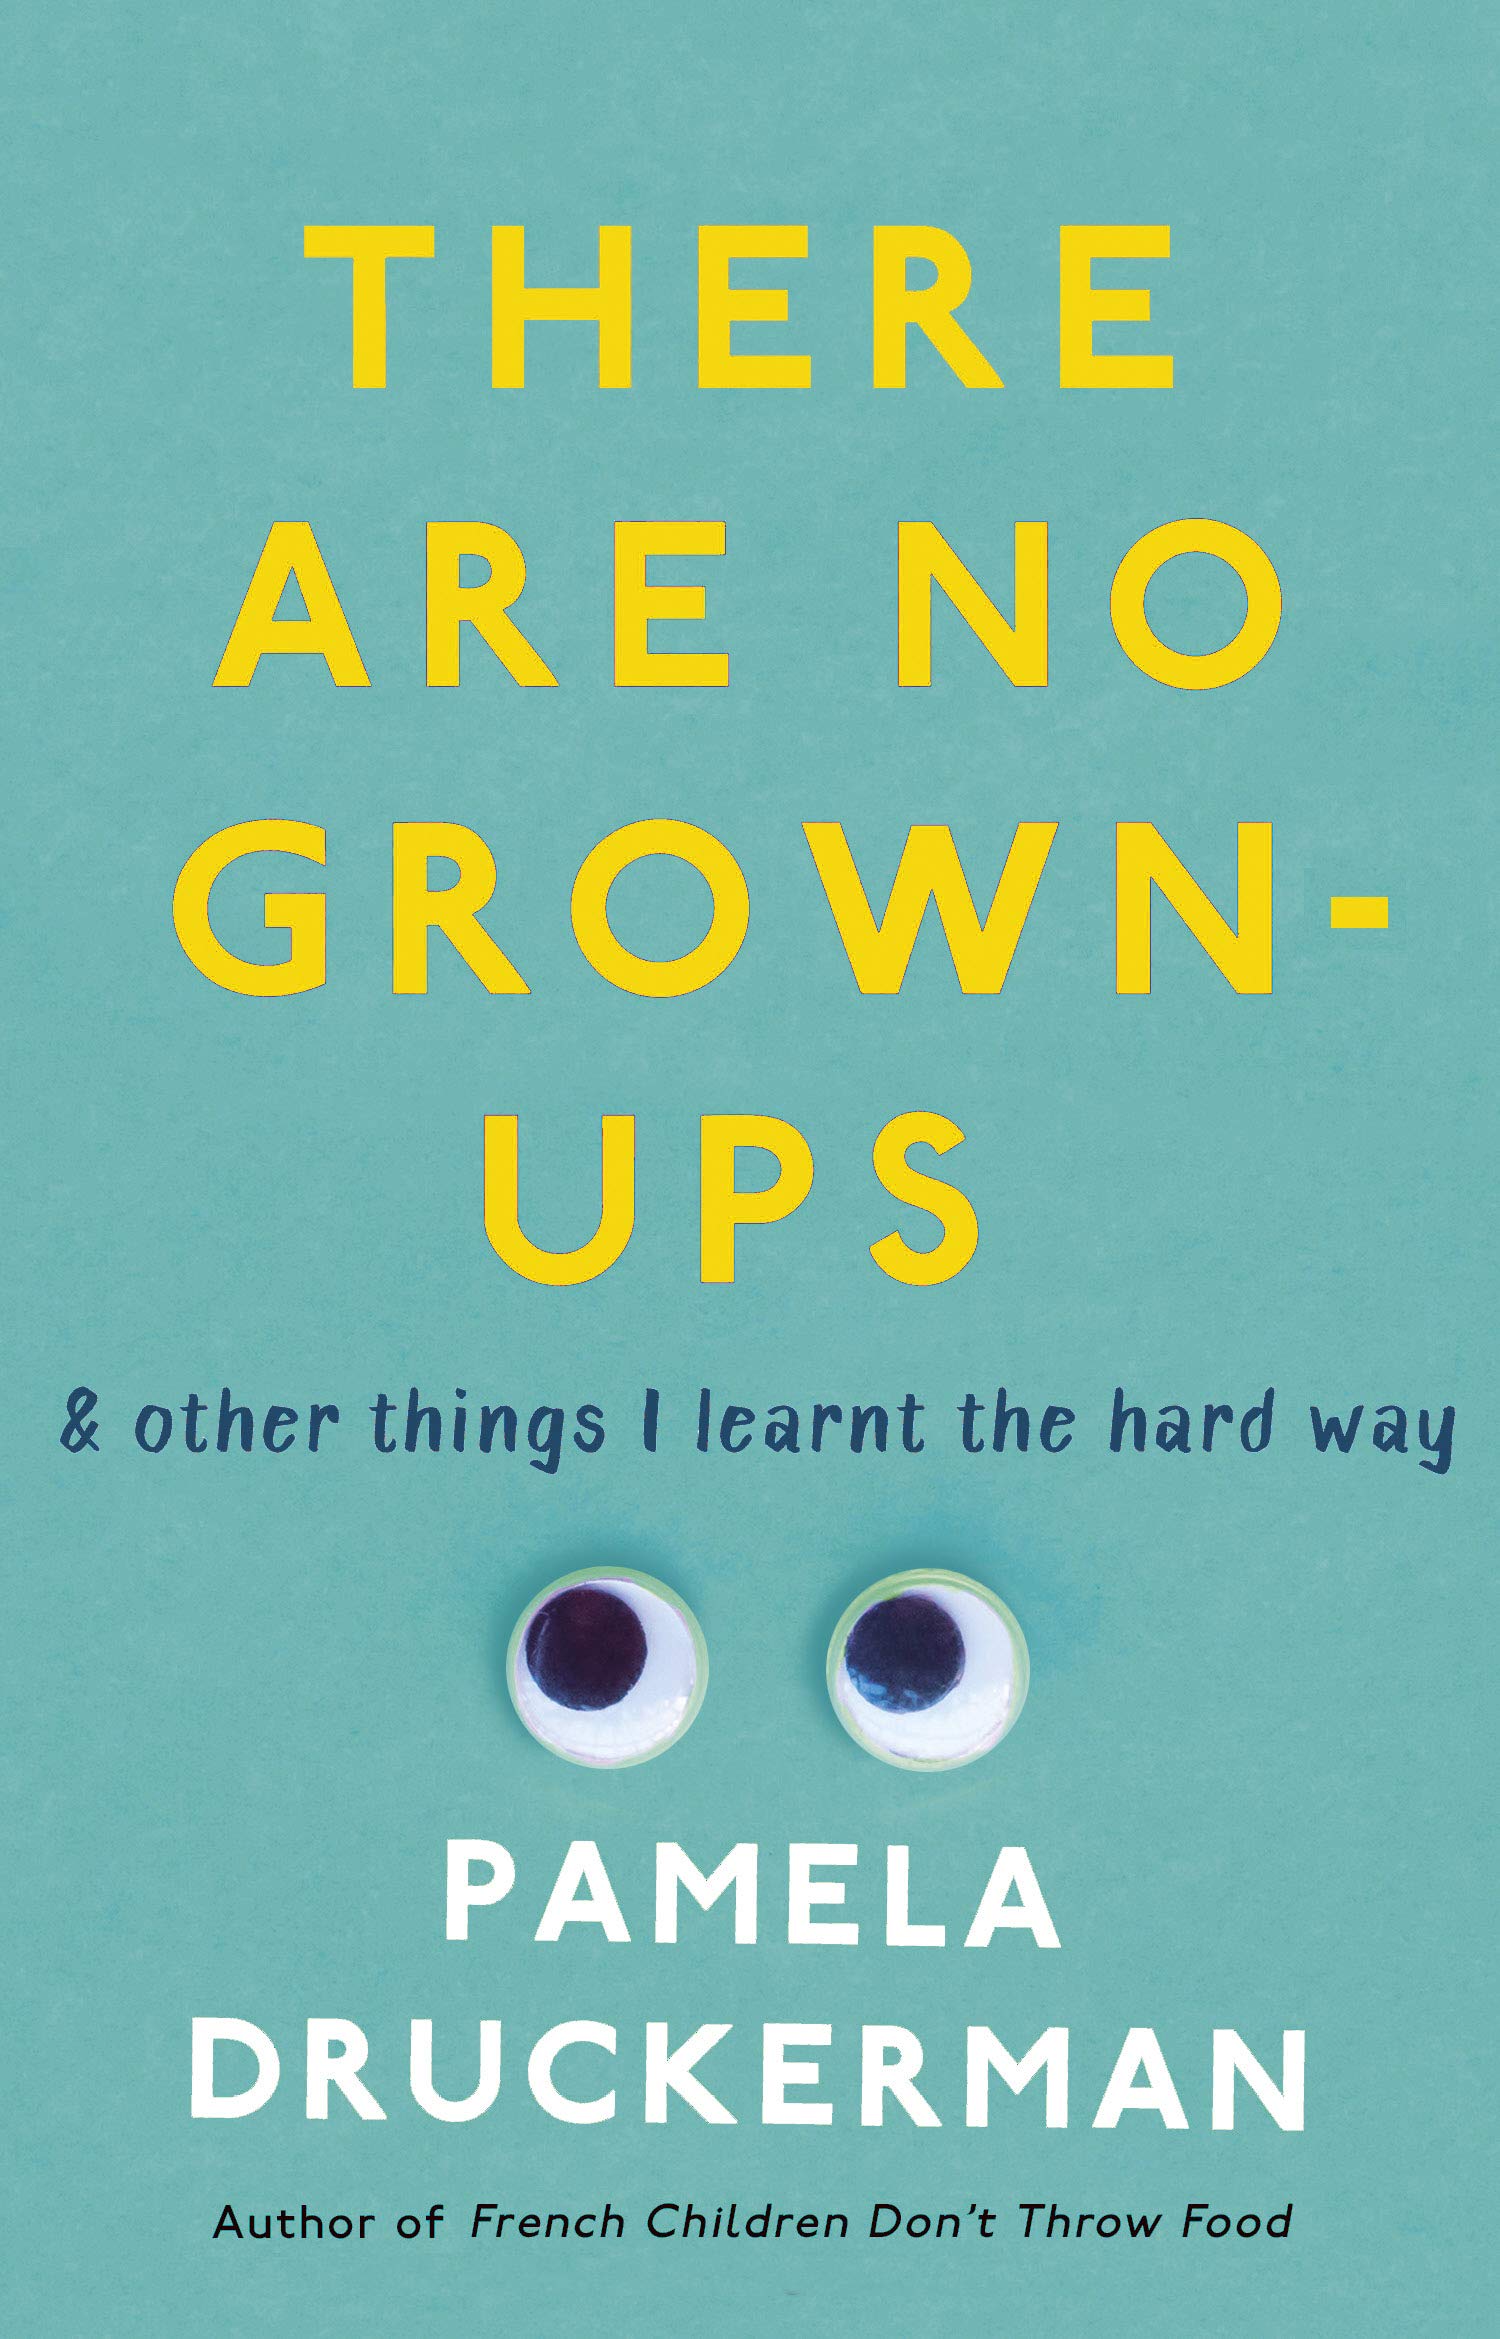 There Are No Grown-Ups: A midlife coming-of-age story | Pamela Druckerman